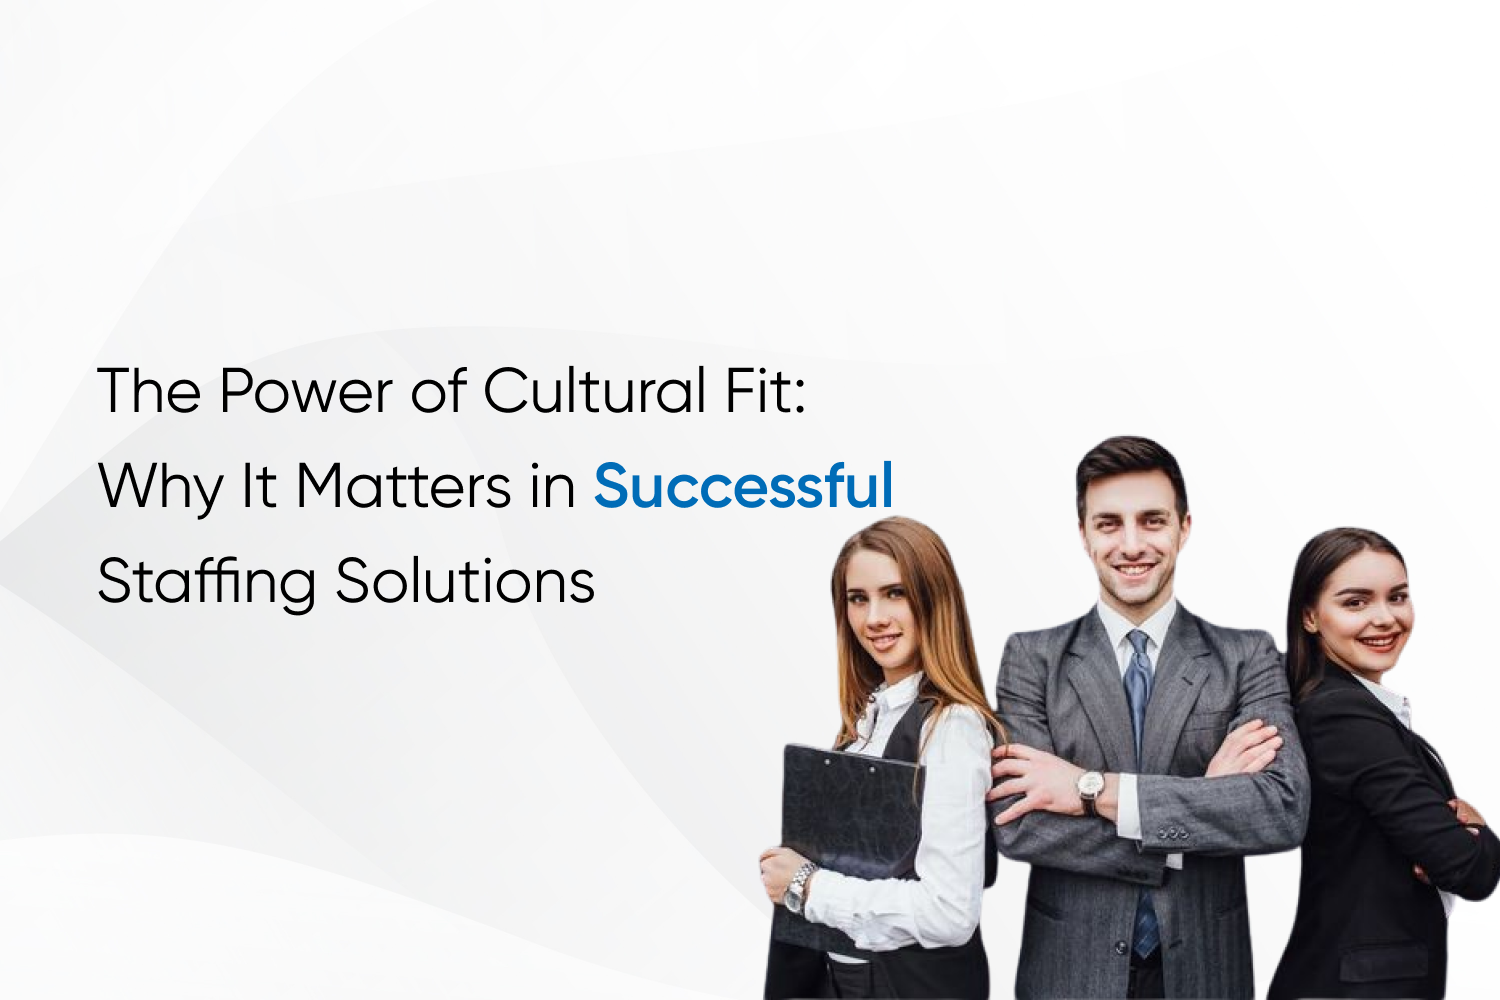 The Power of Cultural Fit: Why It Matters in Successful Staffing Solutions